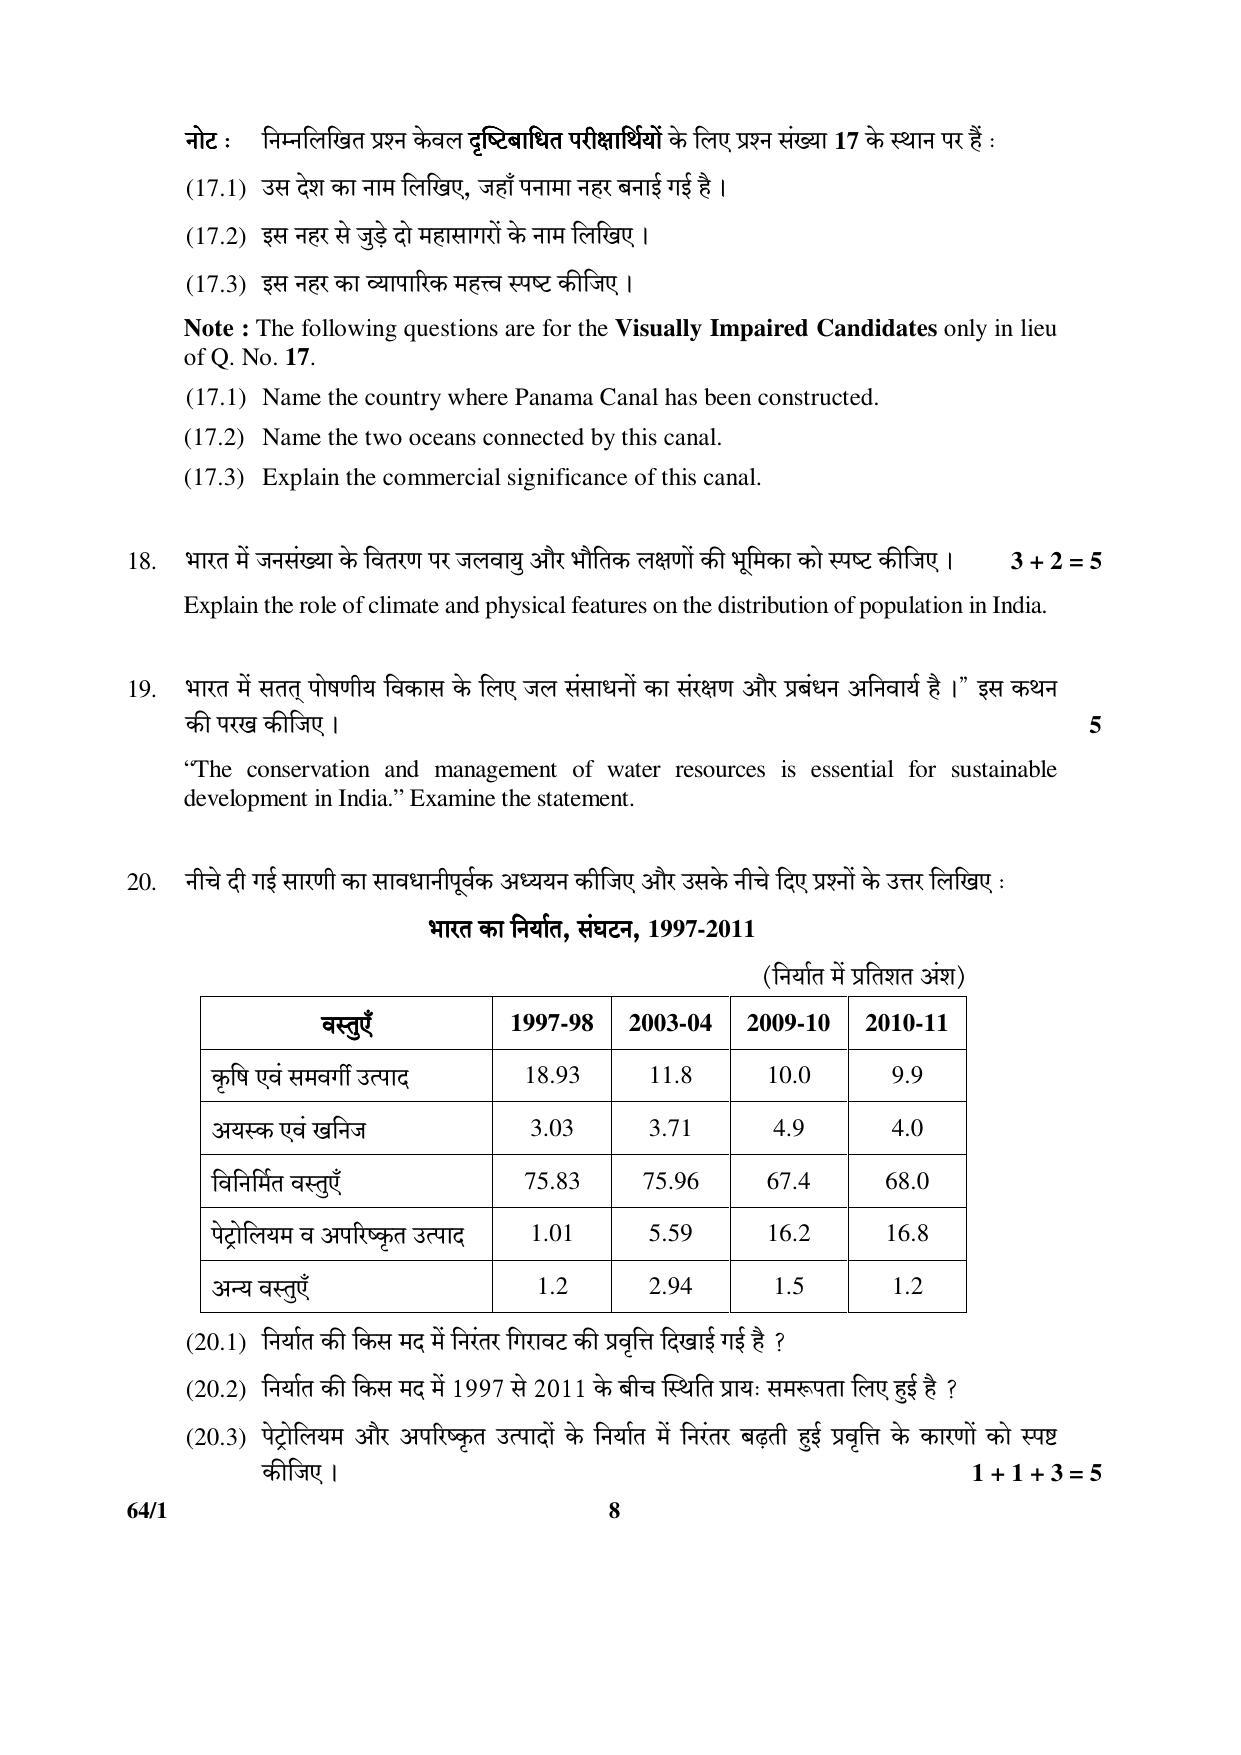 CBSE Class 12 64-1 (Geography) 2017-comptt Question Paper - Page 8